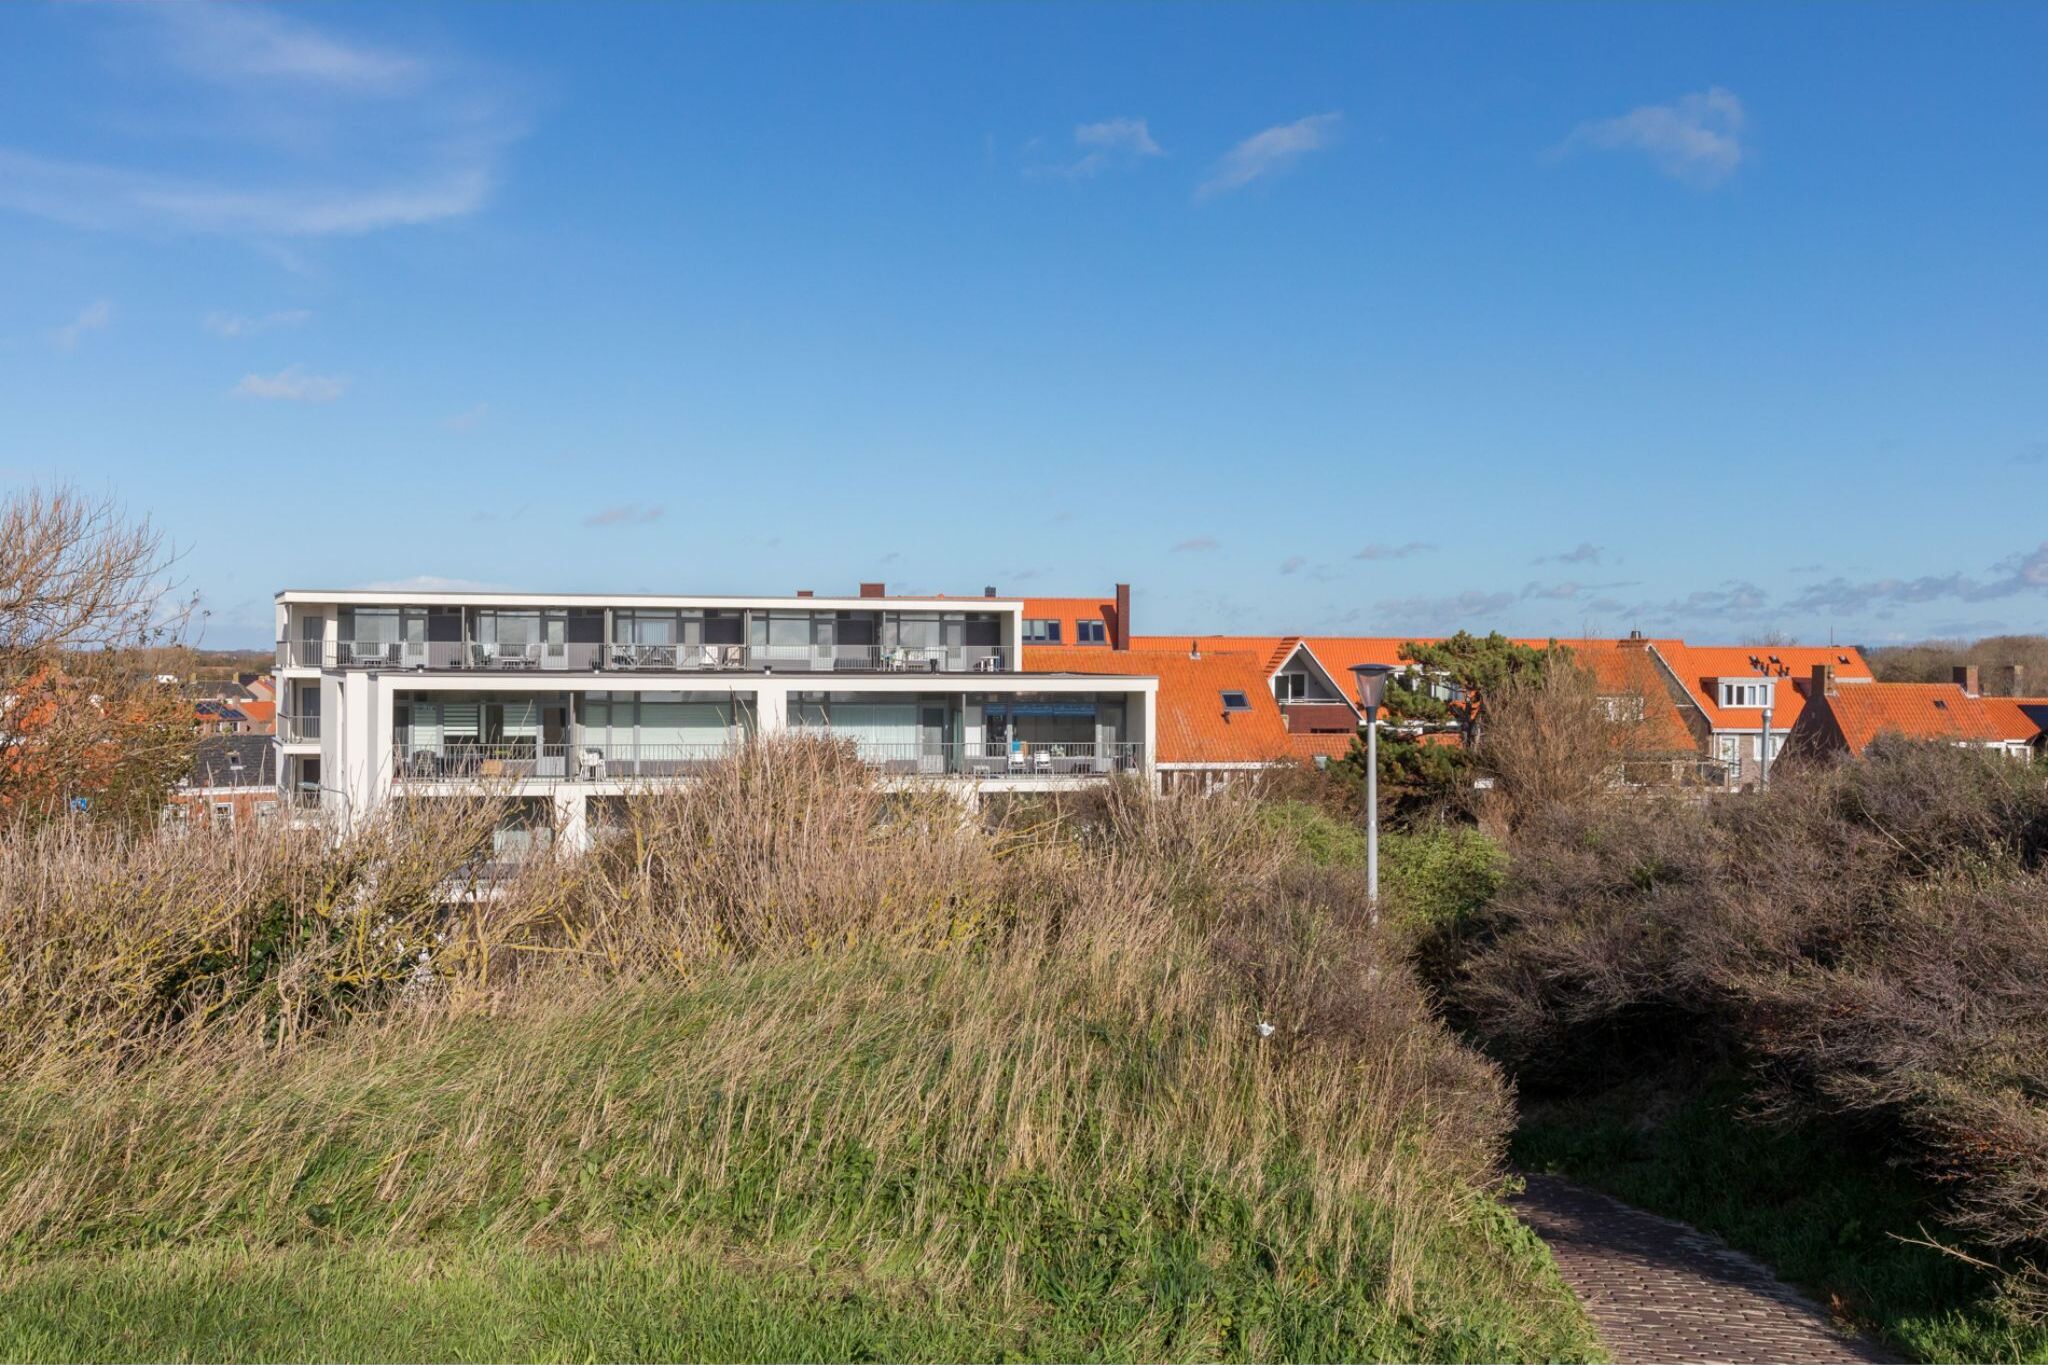 Attractive apartment in the center and at the bottom of the Zoutelande dunes